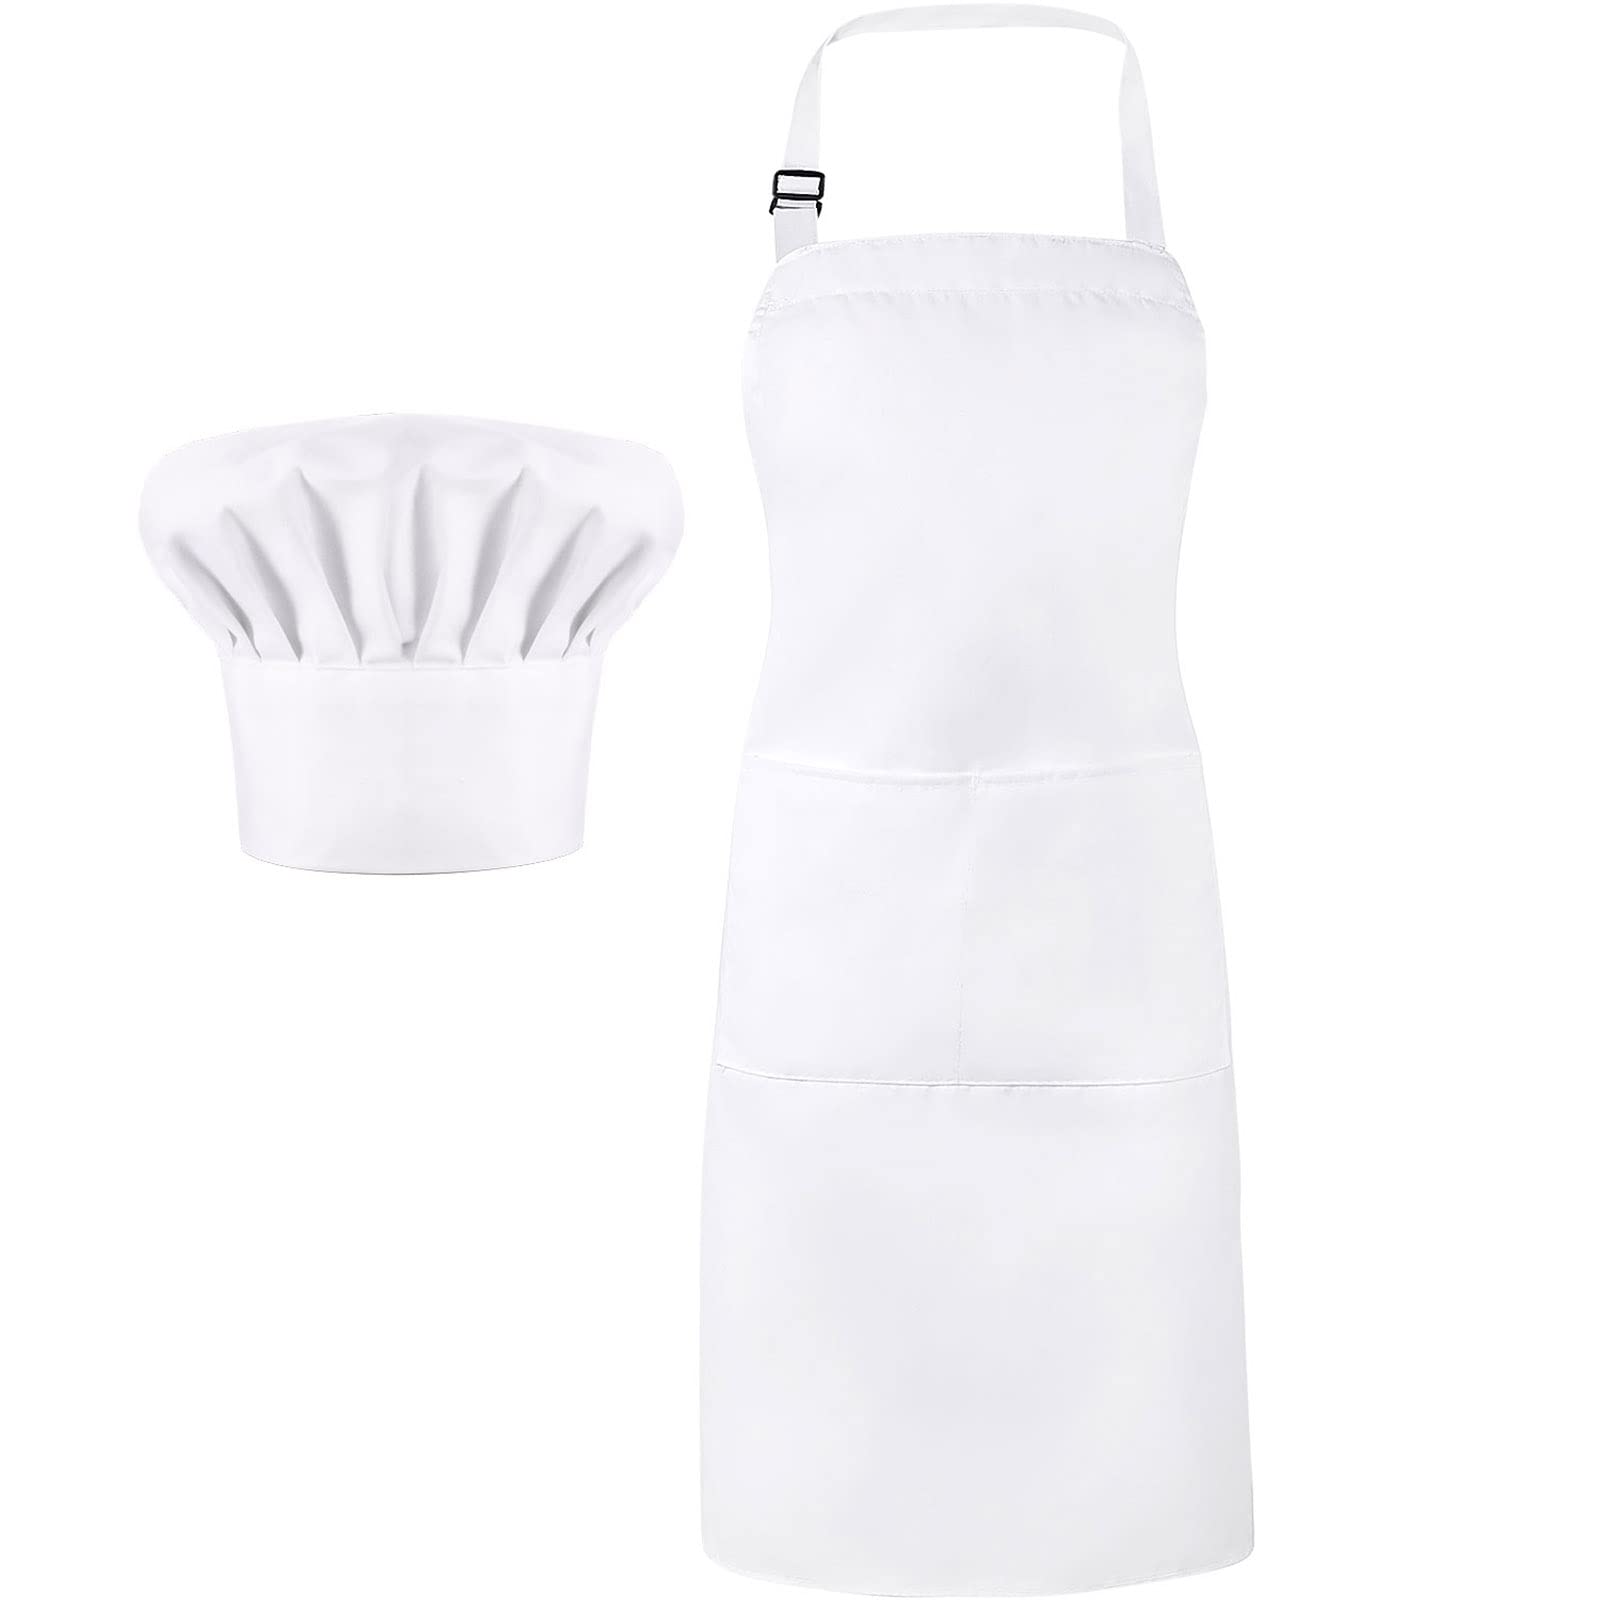 2 Pieces Chef Hat and Aprons Fabric Chef's Cooking Women Apron for Christmas Holiday (White-Black Plaid)